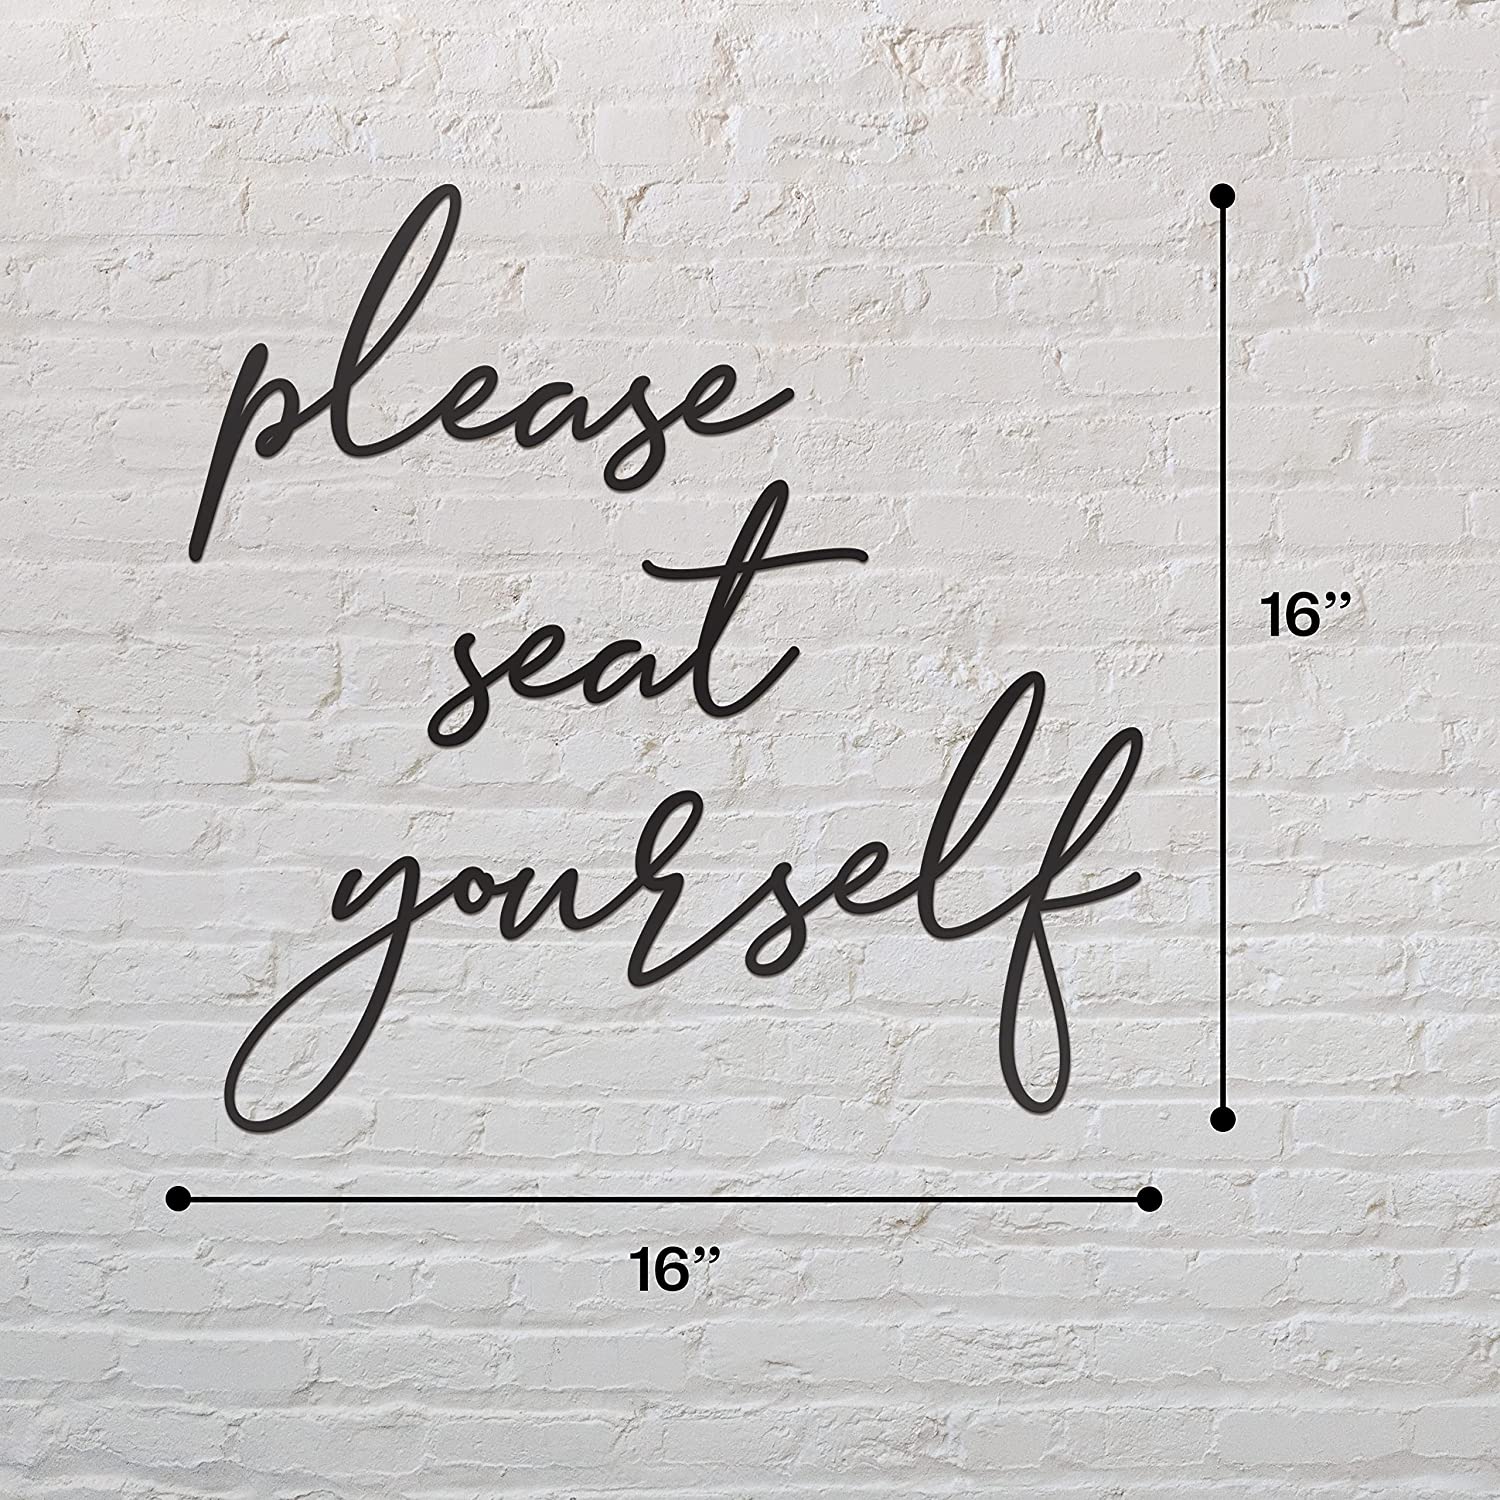 Please Seat Yourself Metal Wall Decor - 16"X16" Black Modern Please Seat Yourself Metal bathroom sign For Hanging Home Wall Décor